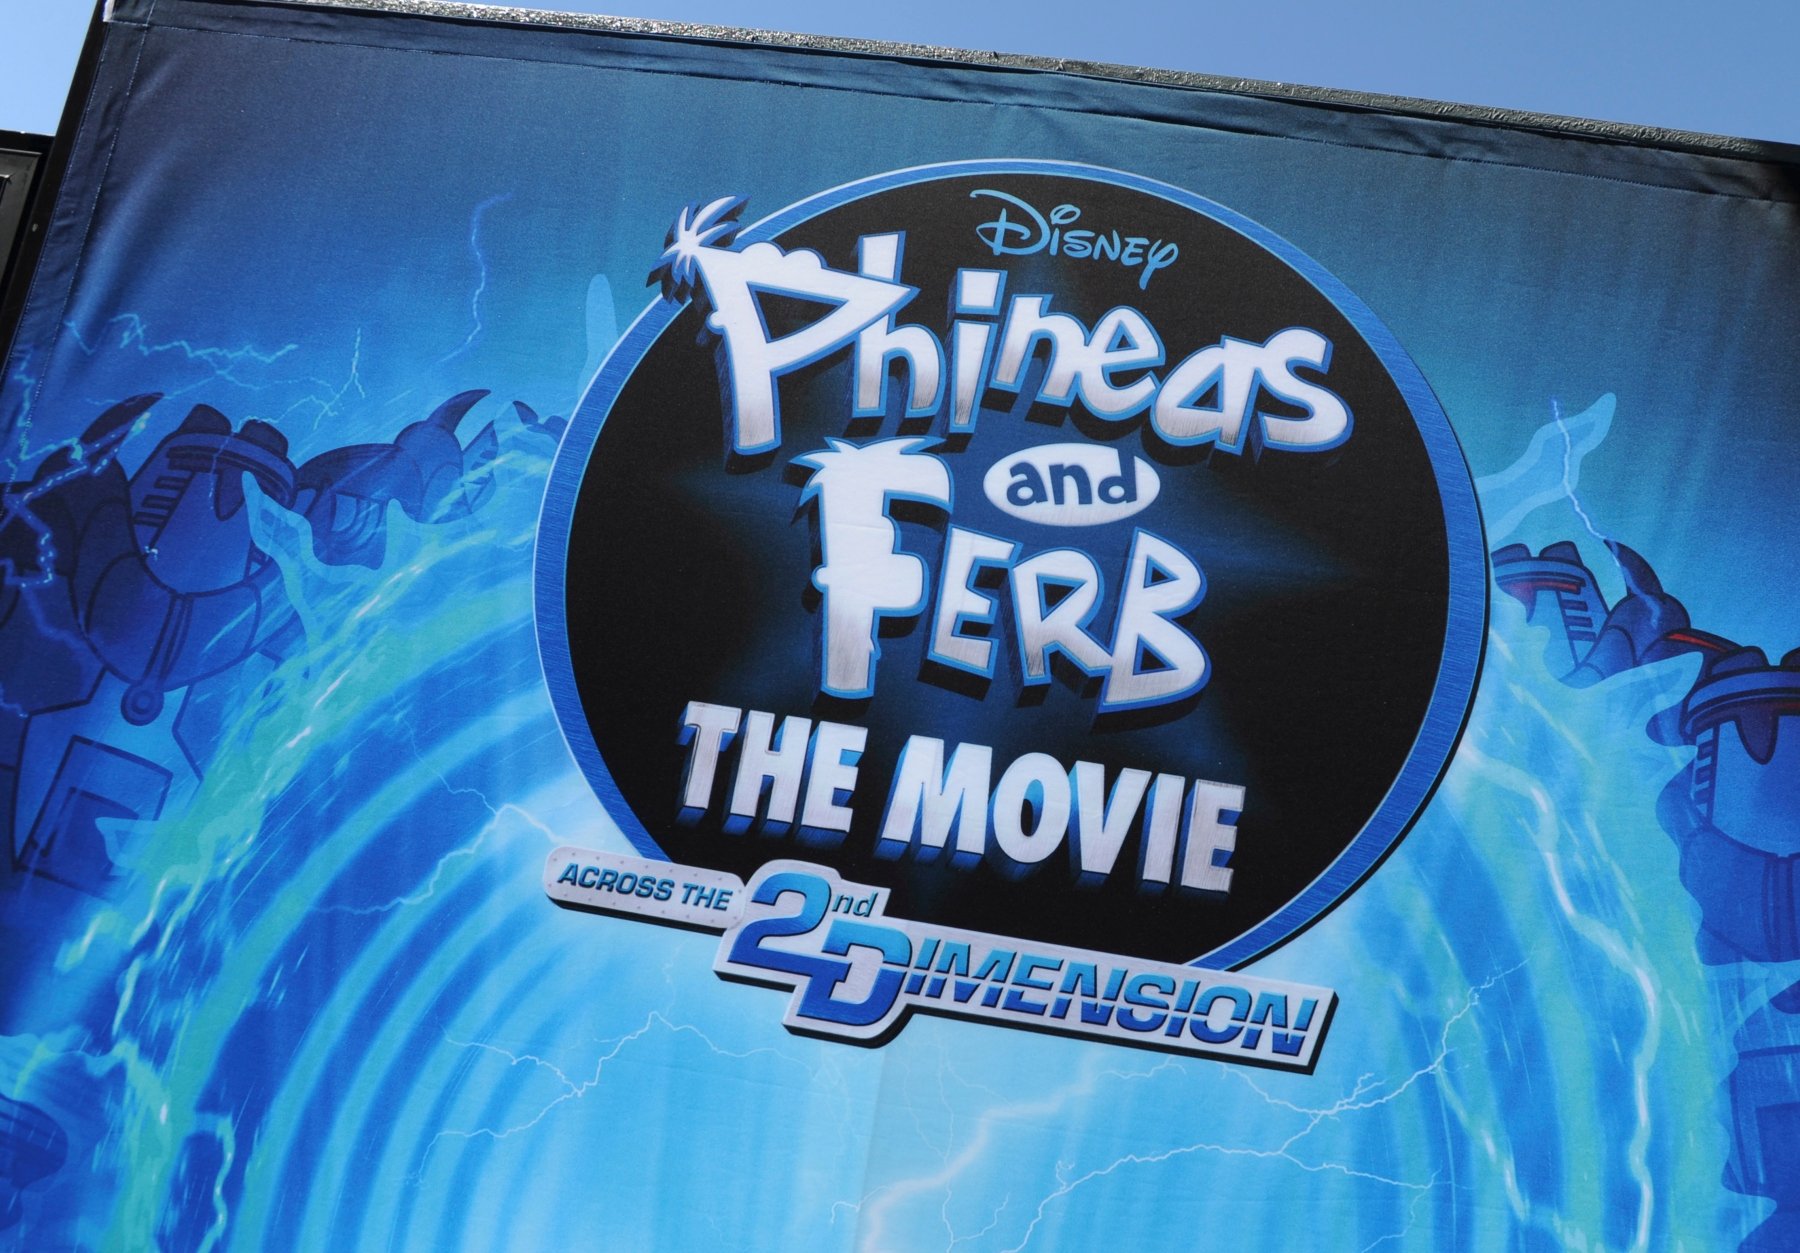 'Phineas and Ferb The Movie: Across the 2nd Dimension' premiere